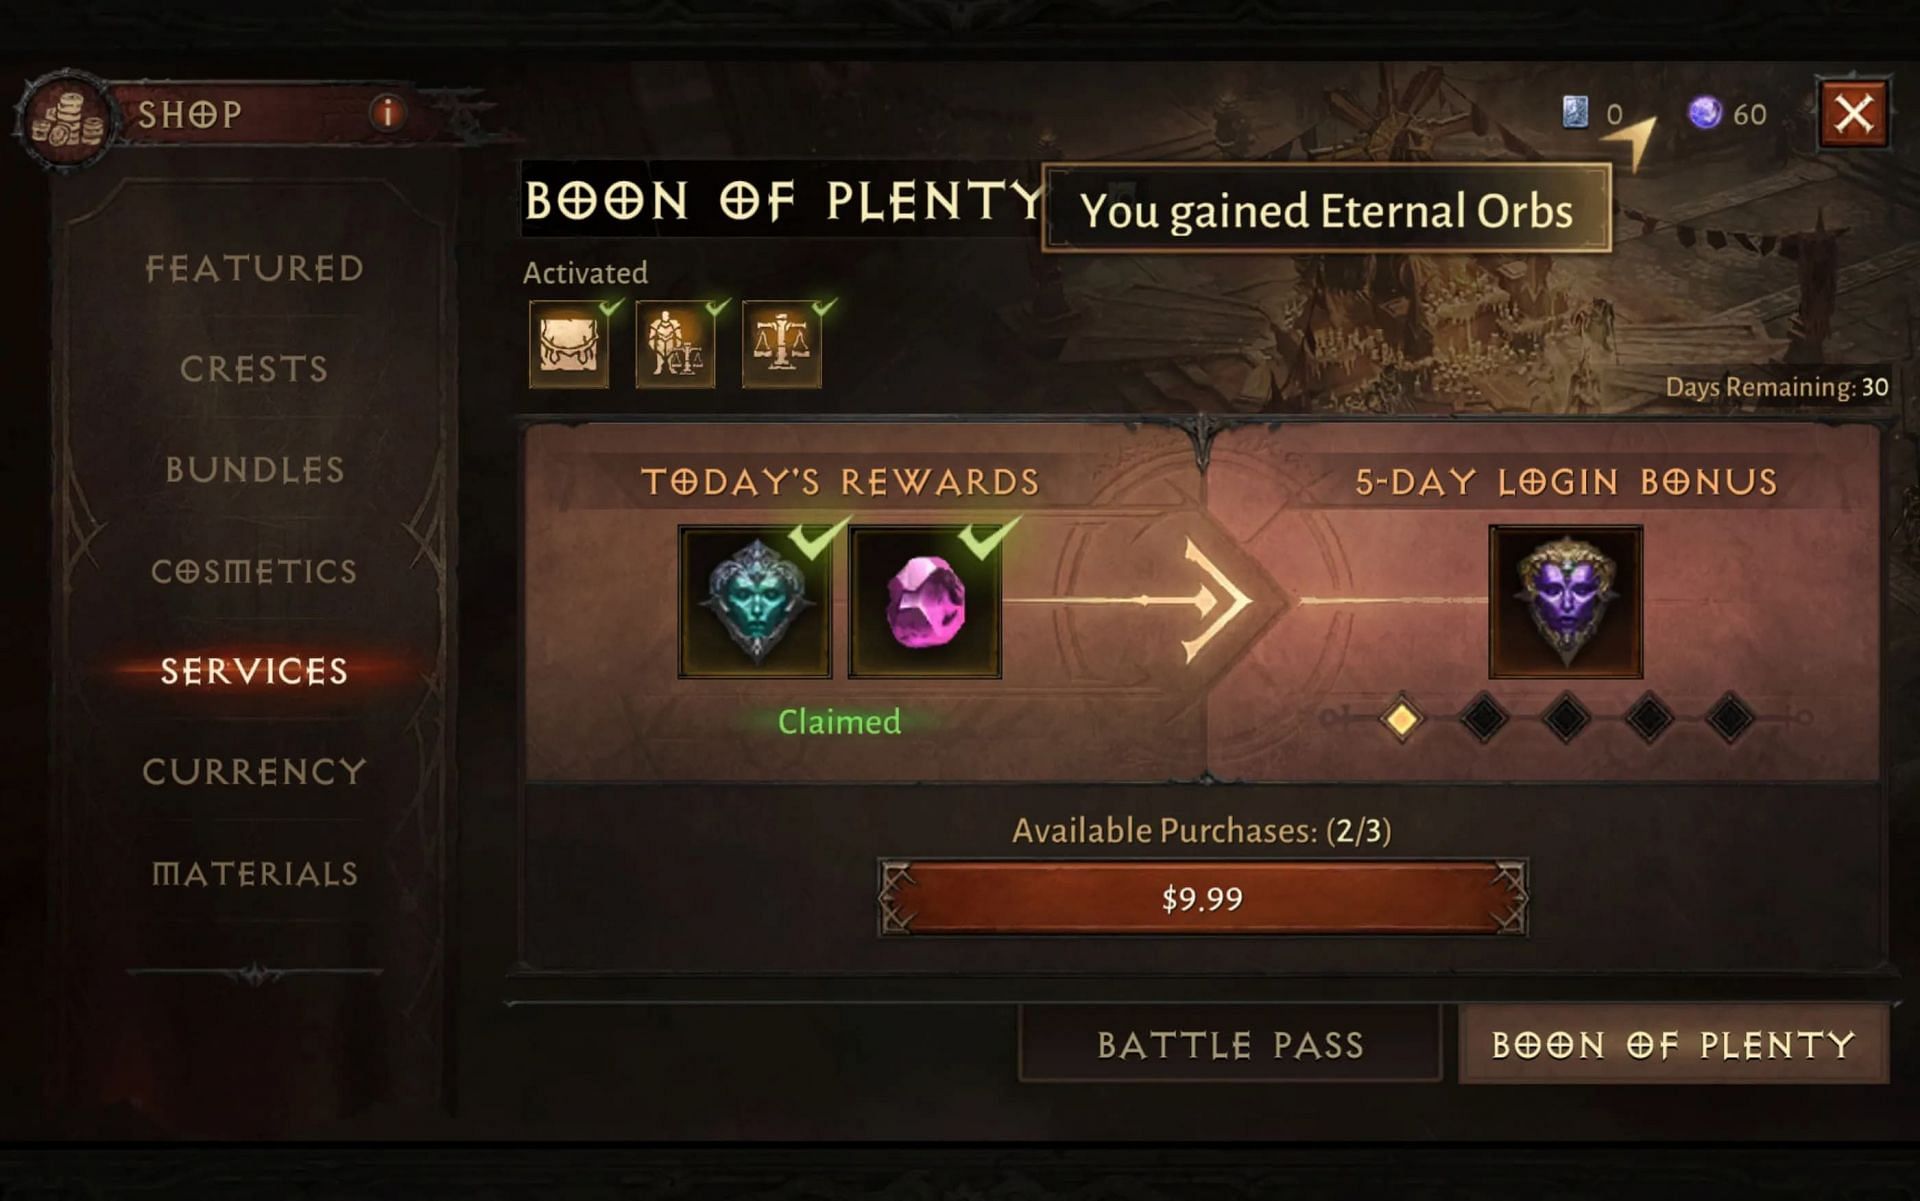 Players can purchase the Boon of Plenty in-game (Image via Blizzard Entertainment)